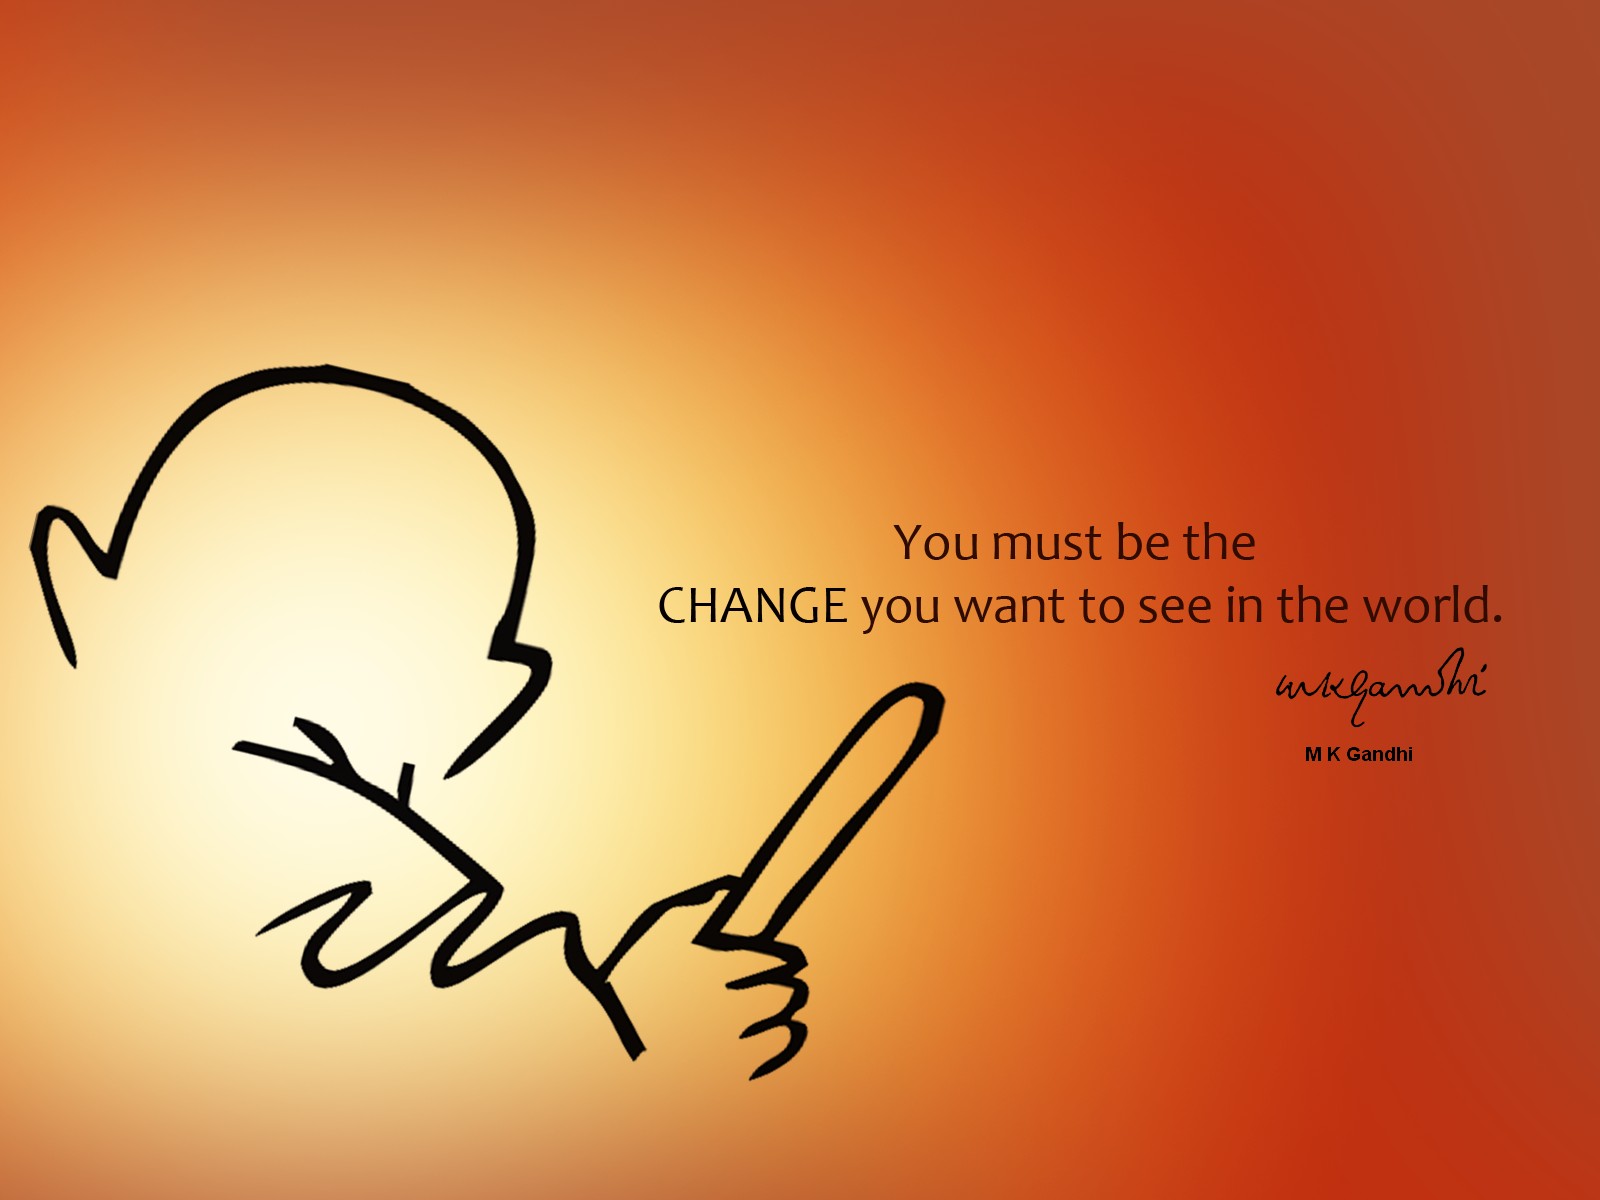 Mahatma Gandhi Wallpaper You Must Be The Change Want To See